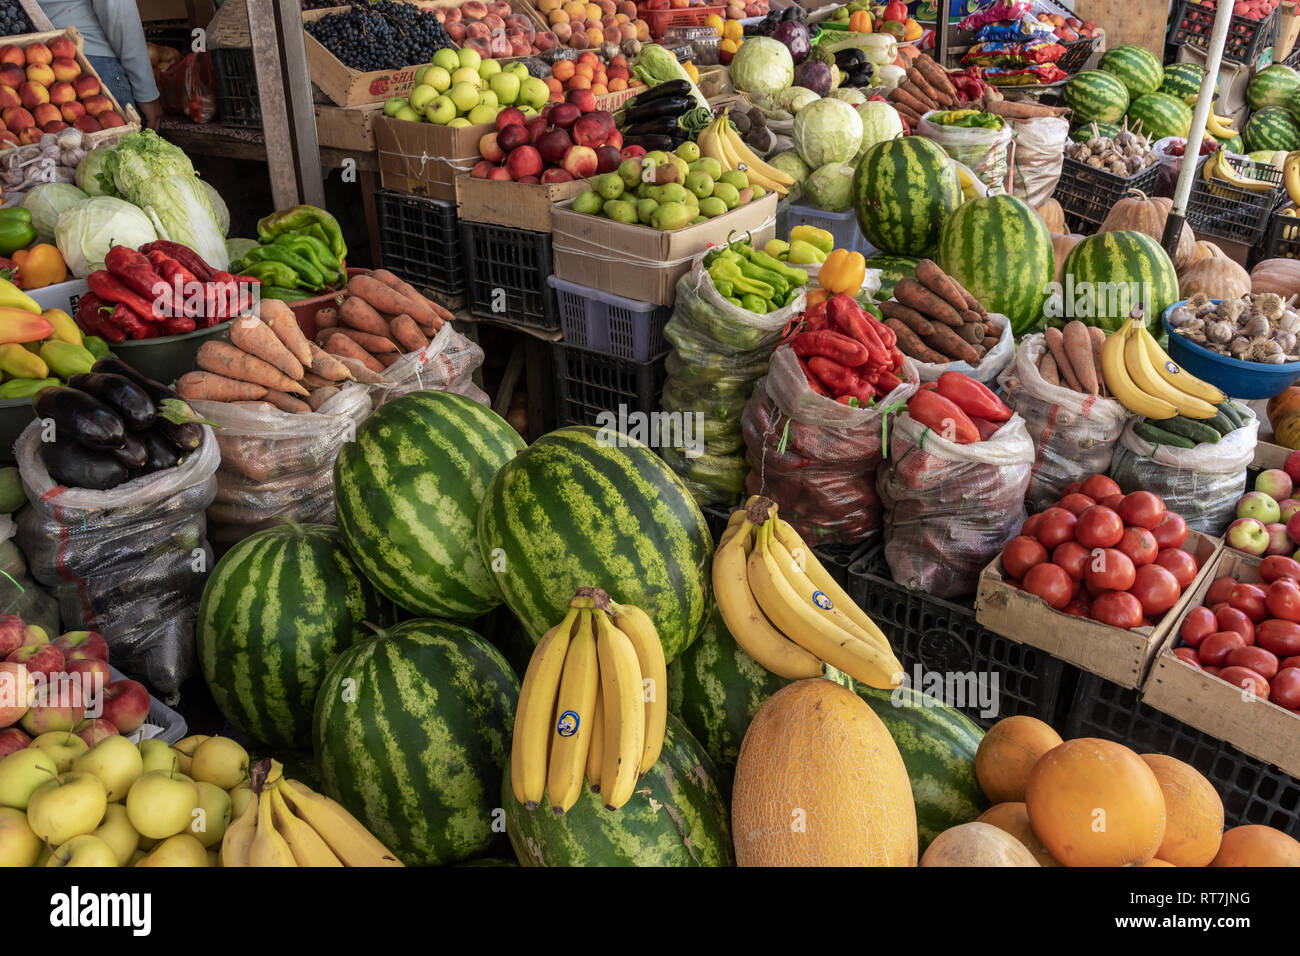 Cartons Of Fruit High Resolution Stock Photography and Images - Alamy